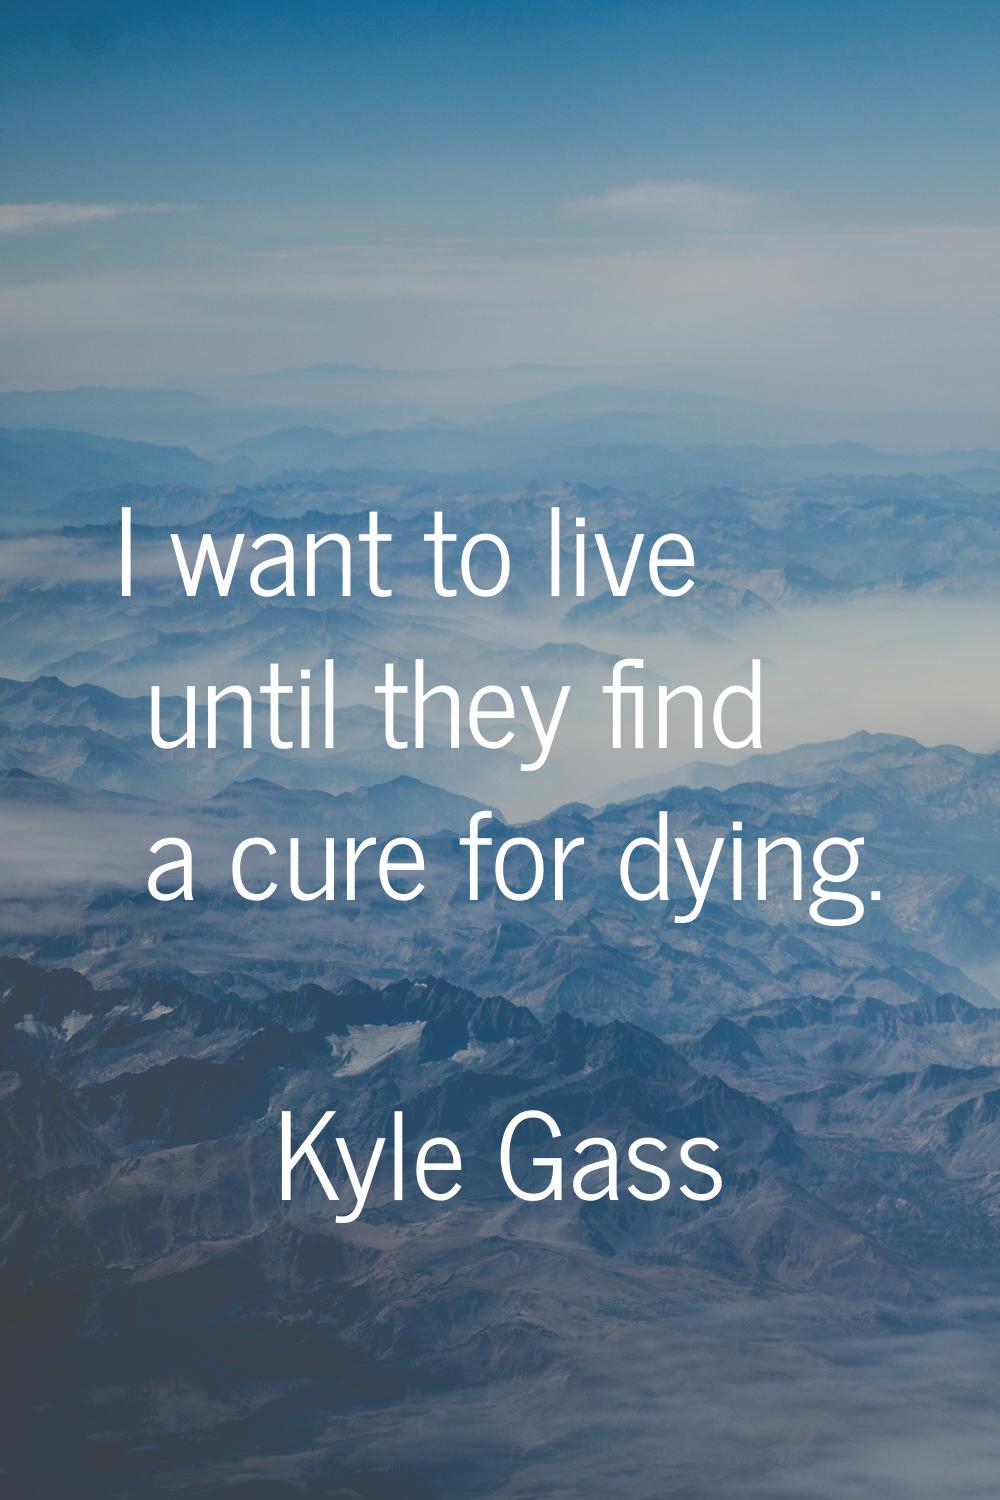 I want to live until they find a cure for dying.